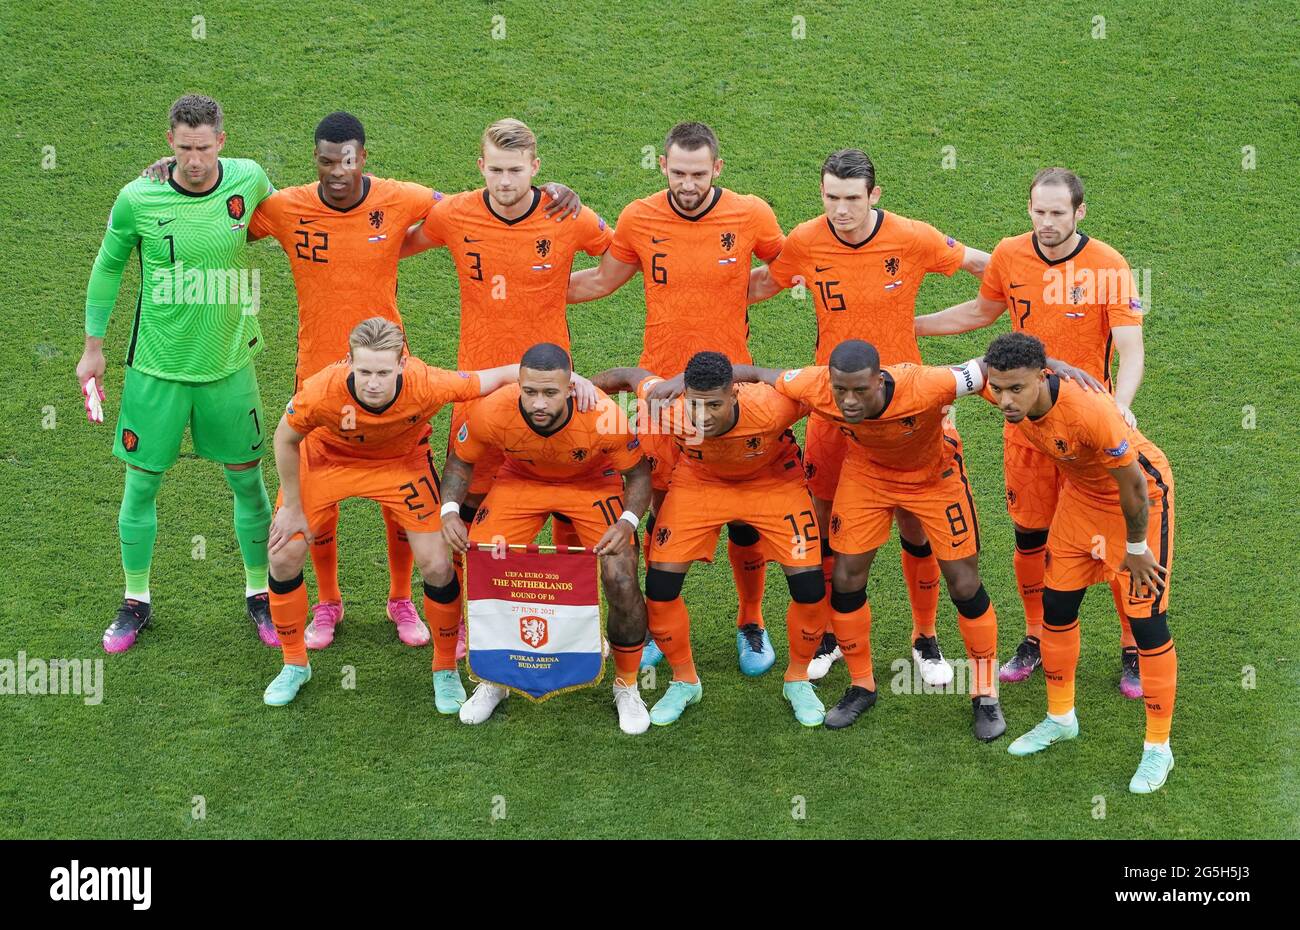 Nederlands Elftal Dutch Team During The Uefa Euro 2020 Round Of 16 Match Between Netherlands Czech Republic On June 27 2021 At The Ferenc Puskas Arena In Budapest Credit Scs Soenar Chamid Aflo Alamy Live News